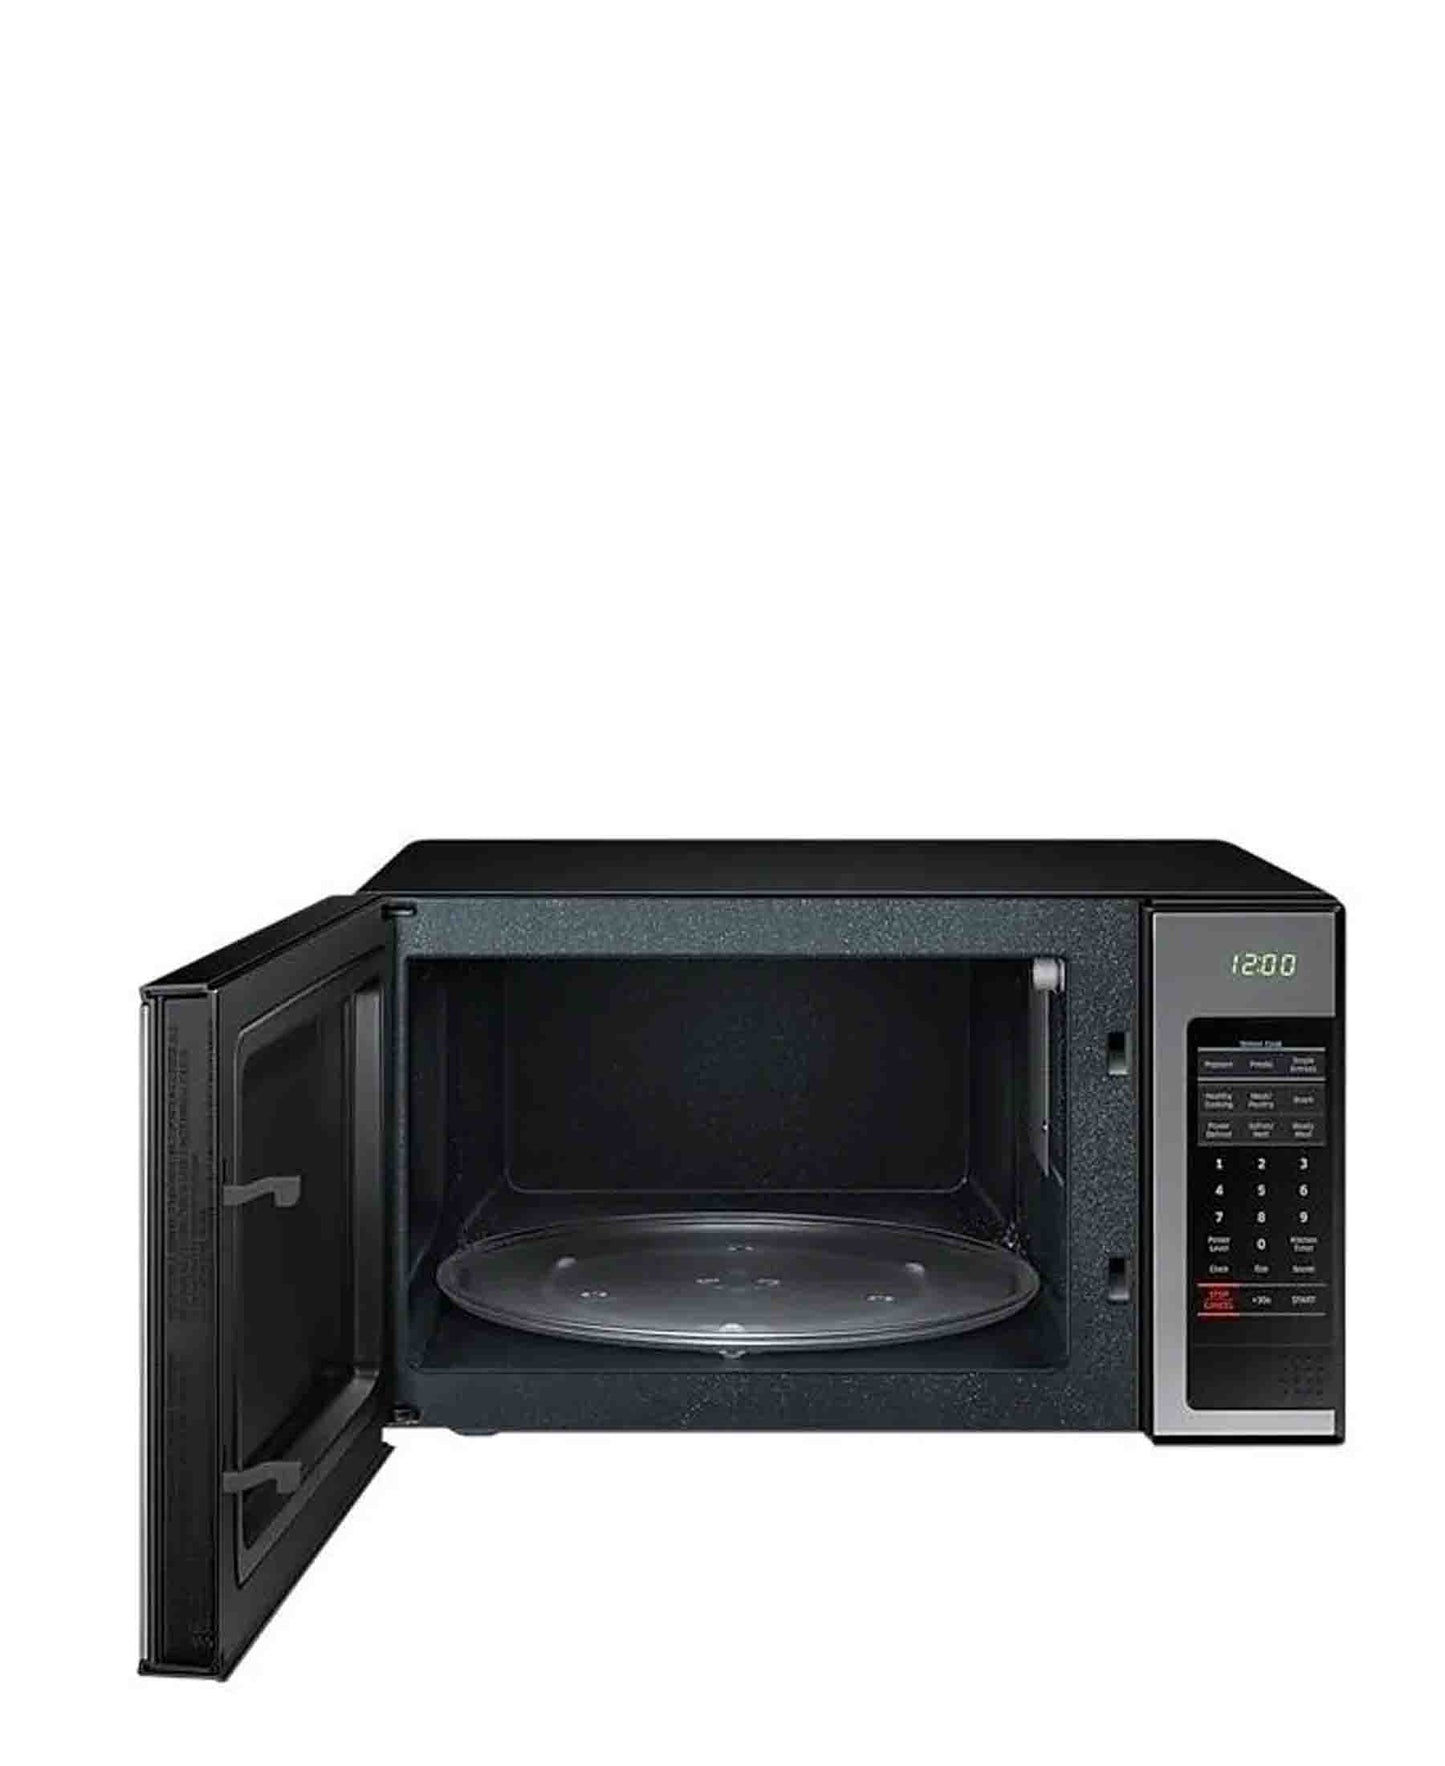 Samsung 23L Microwave Oven - Mirror